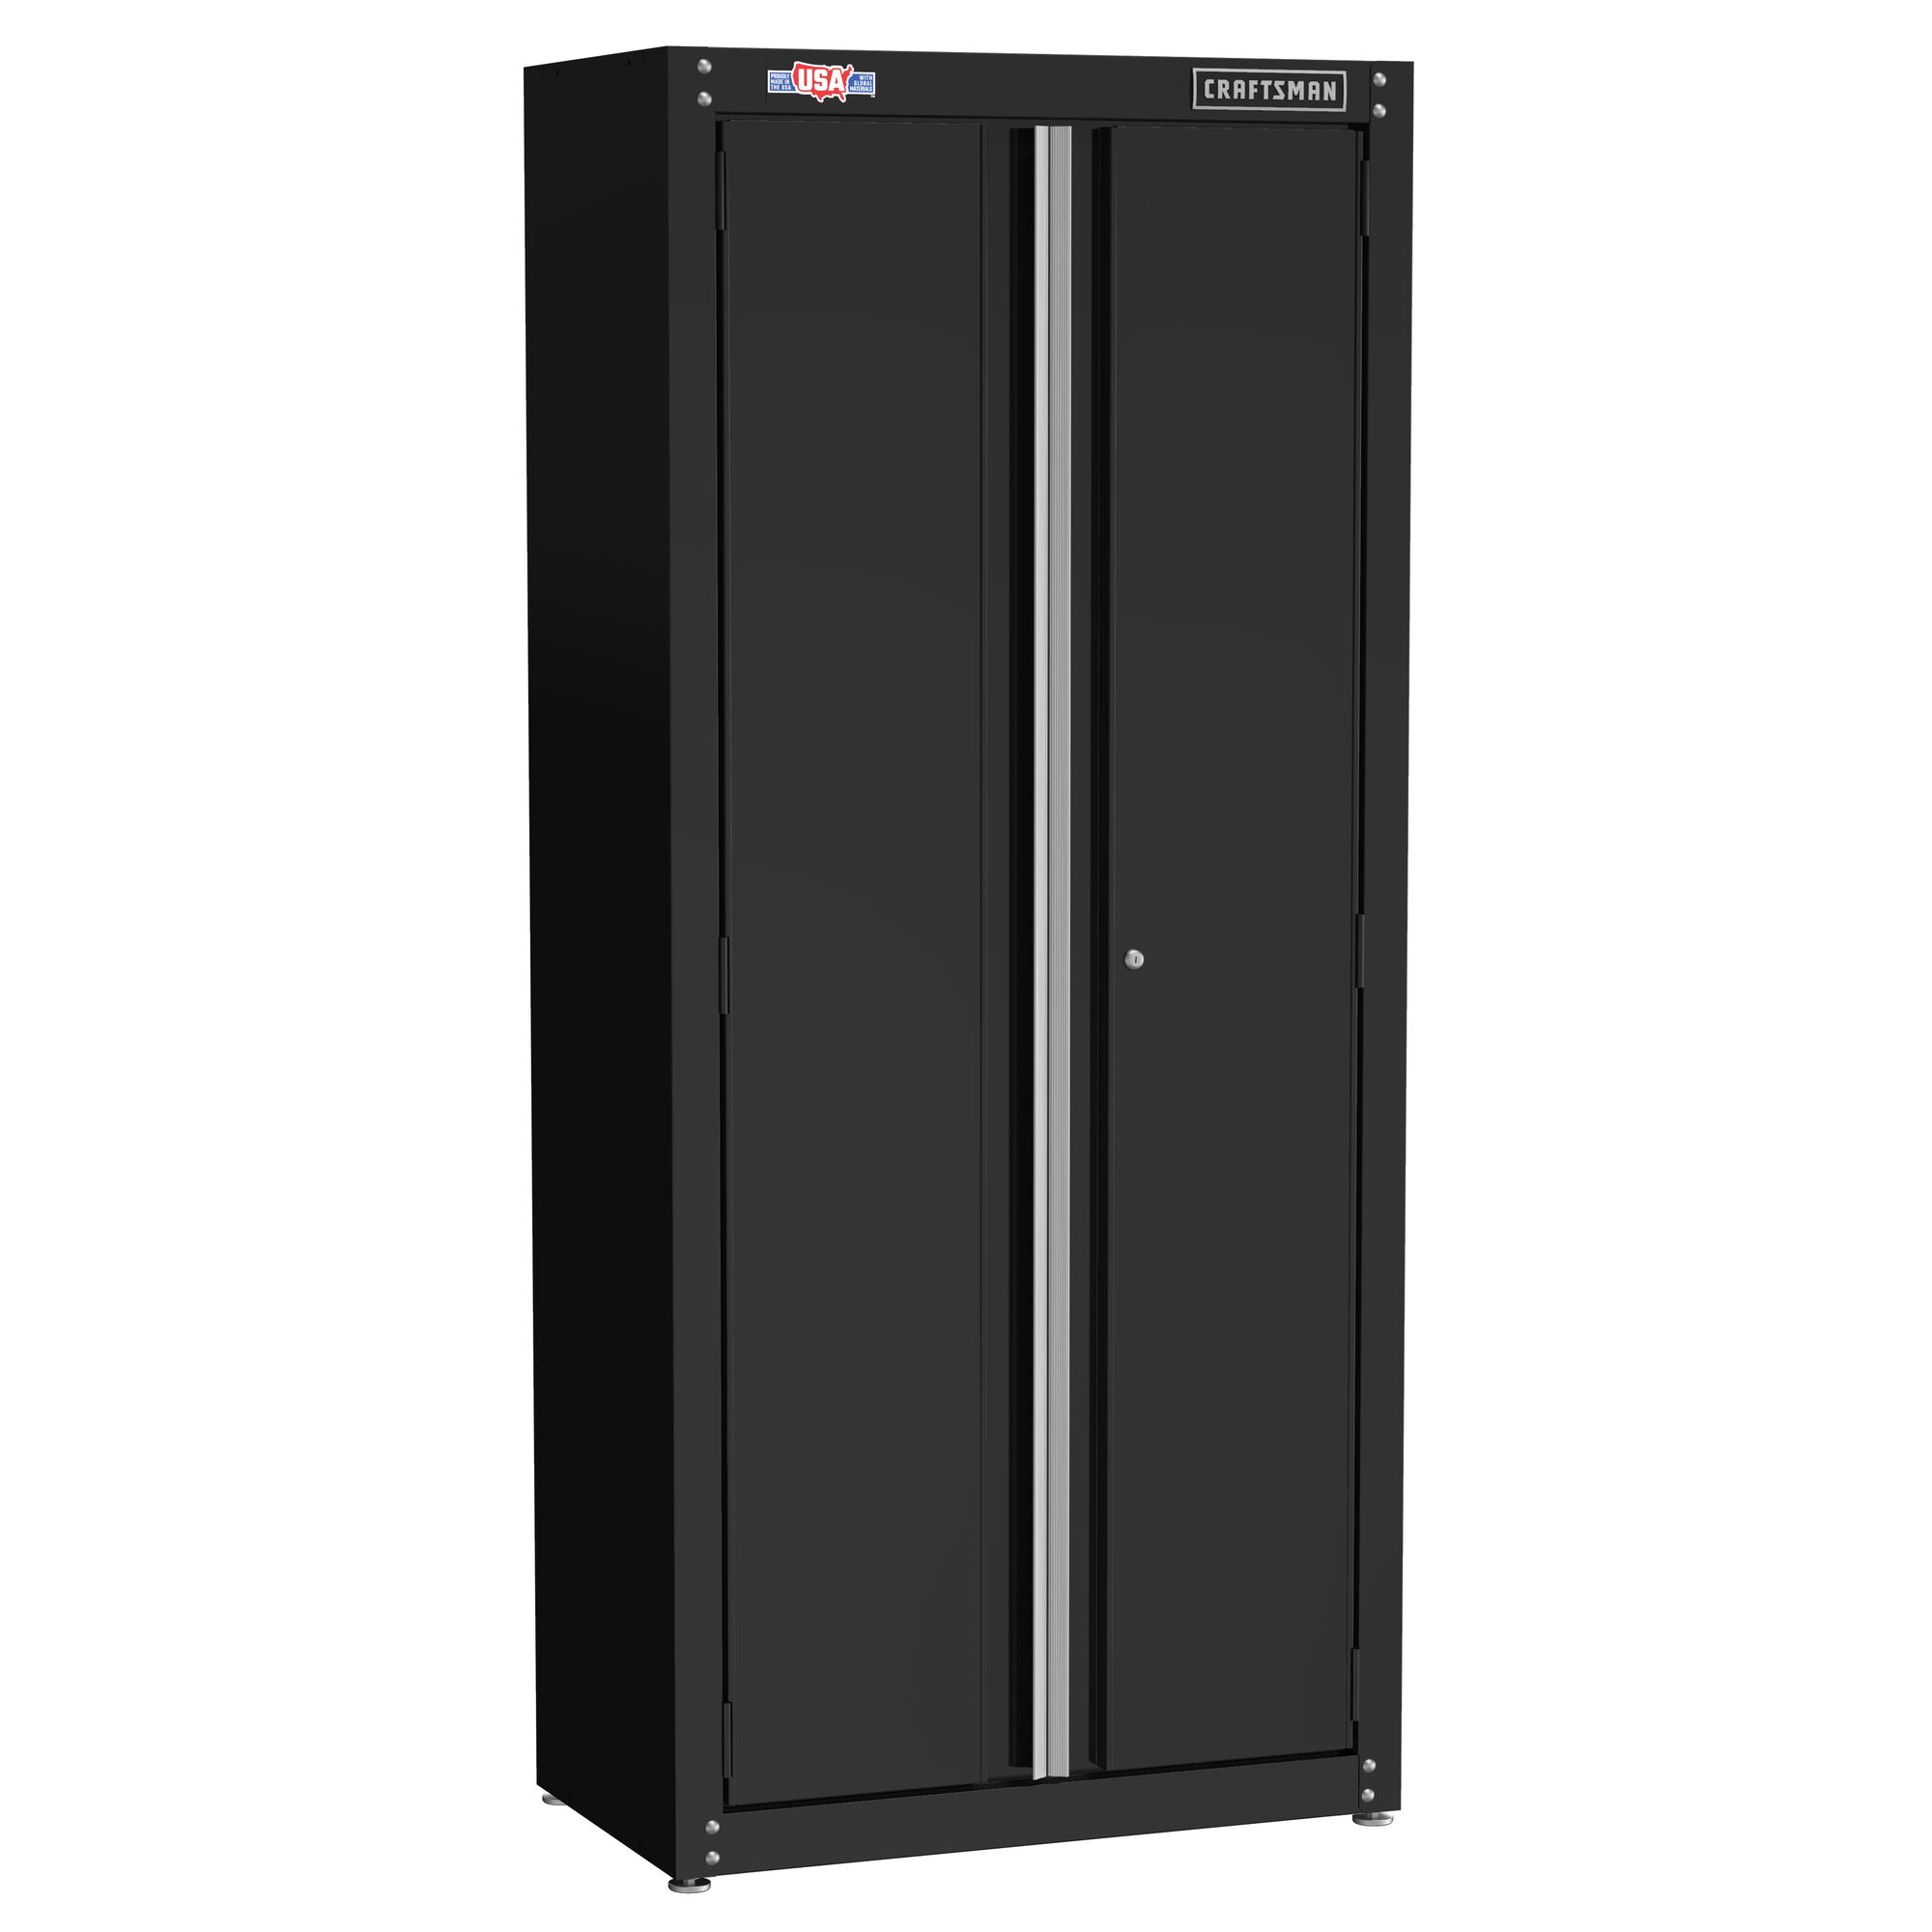 CRAFTSMAN 32-in wide storage cabinet angled view